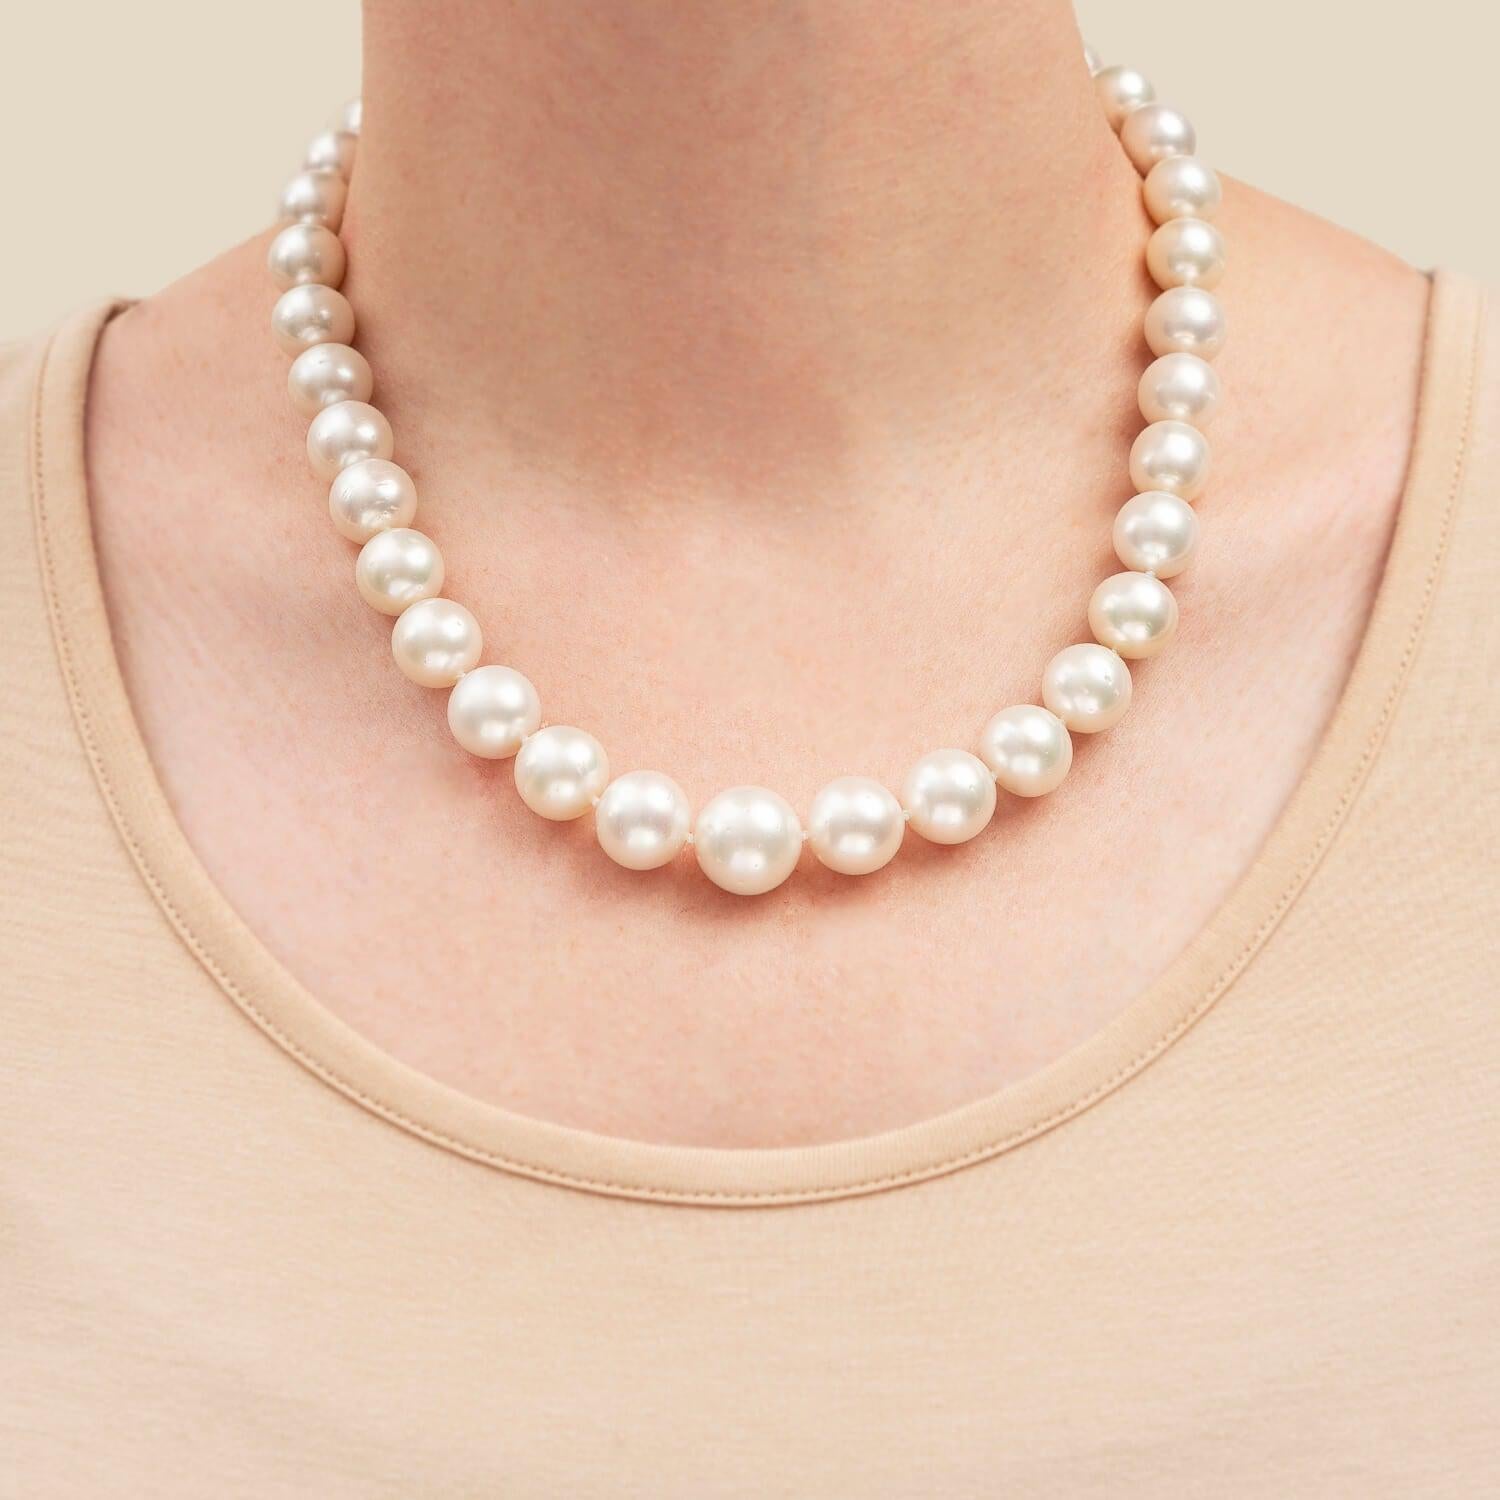 Cabochon Edwardian South Sea Pearl Necklace with Diamond + Ruby Clasp For Sale